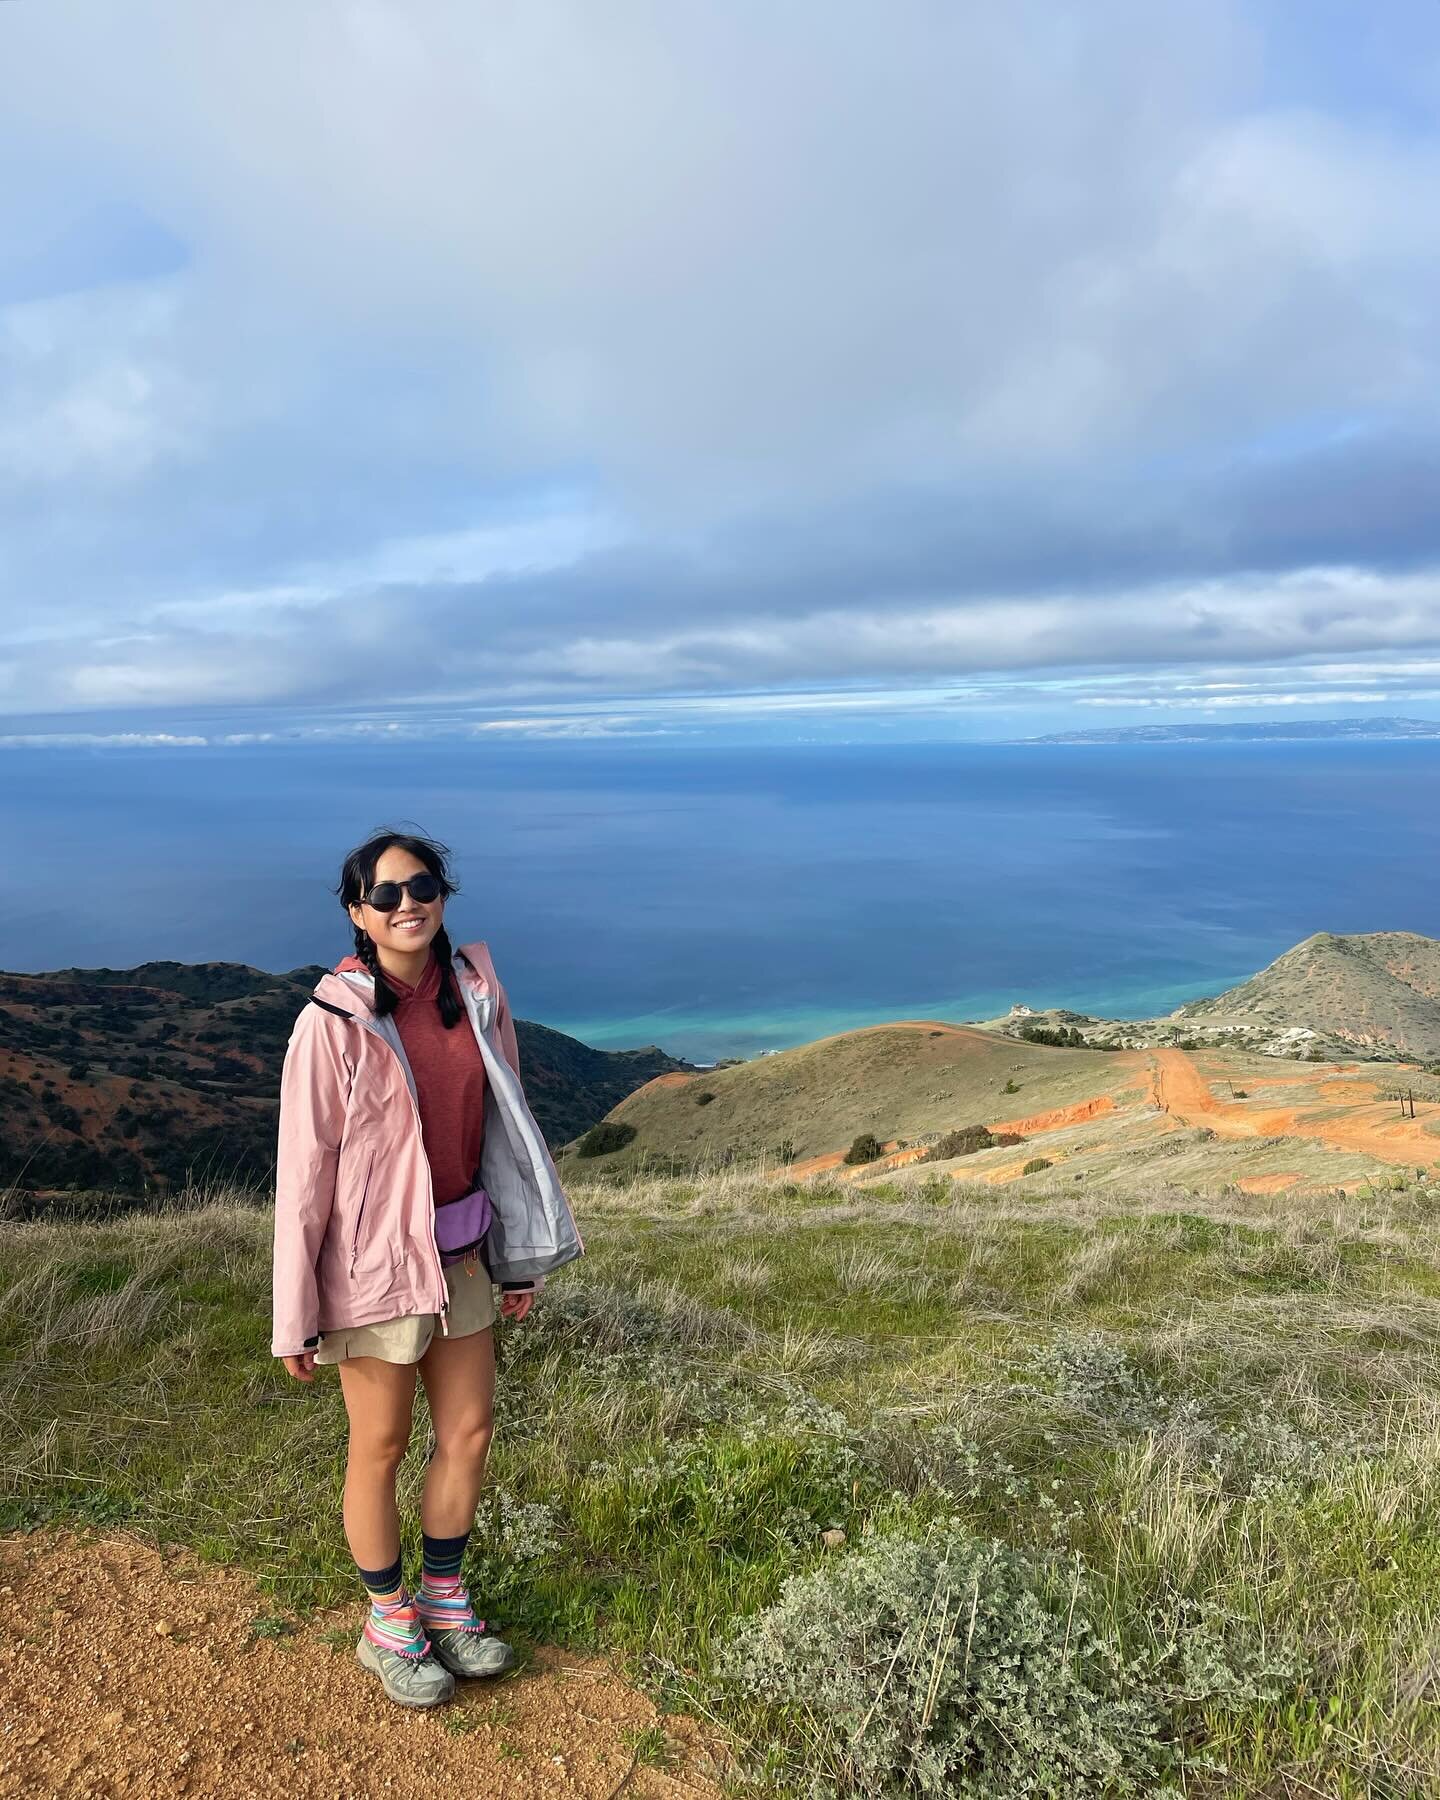 Hiked 38.5 miles on the Trans-Catalina trail (TCT) on Catalina Island this past weekend! 

We camped at Hermit Gulch, Little Harbor, and Parsons Landing. Make sure to make campground reservations online when they are released on Jan 1 every year for 